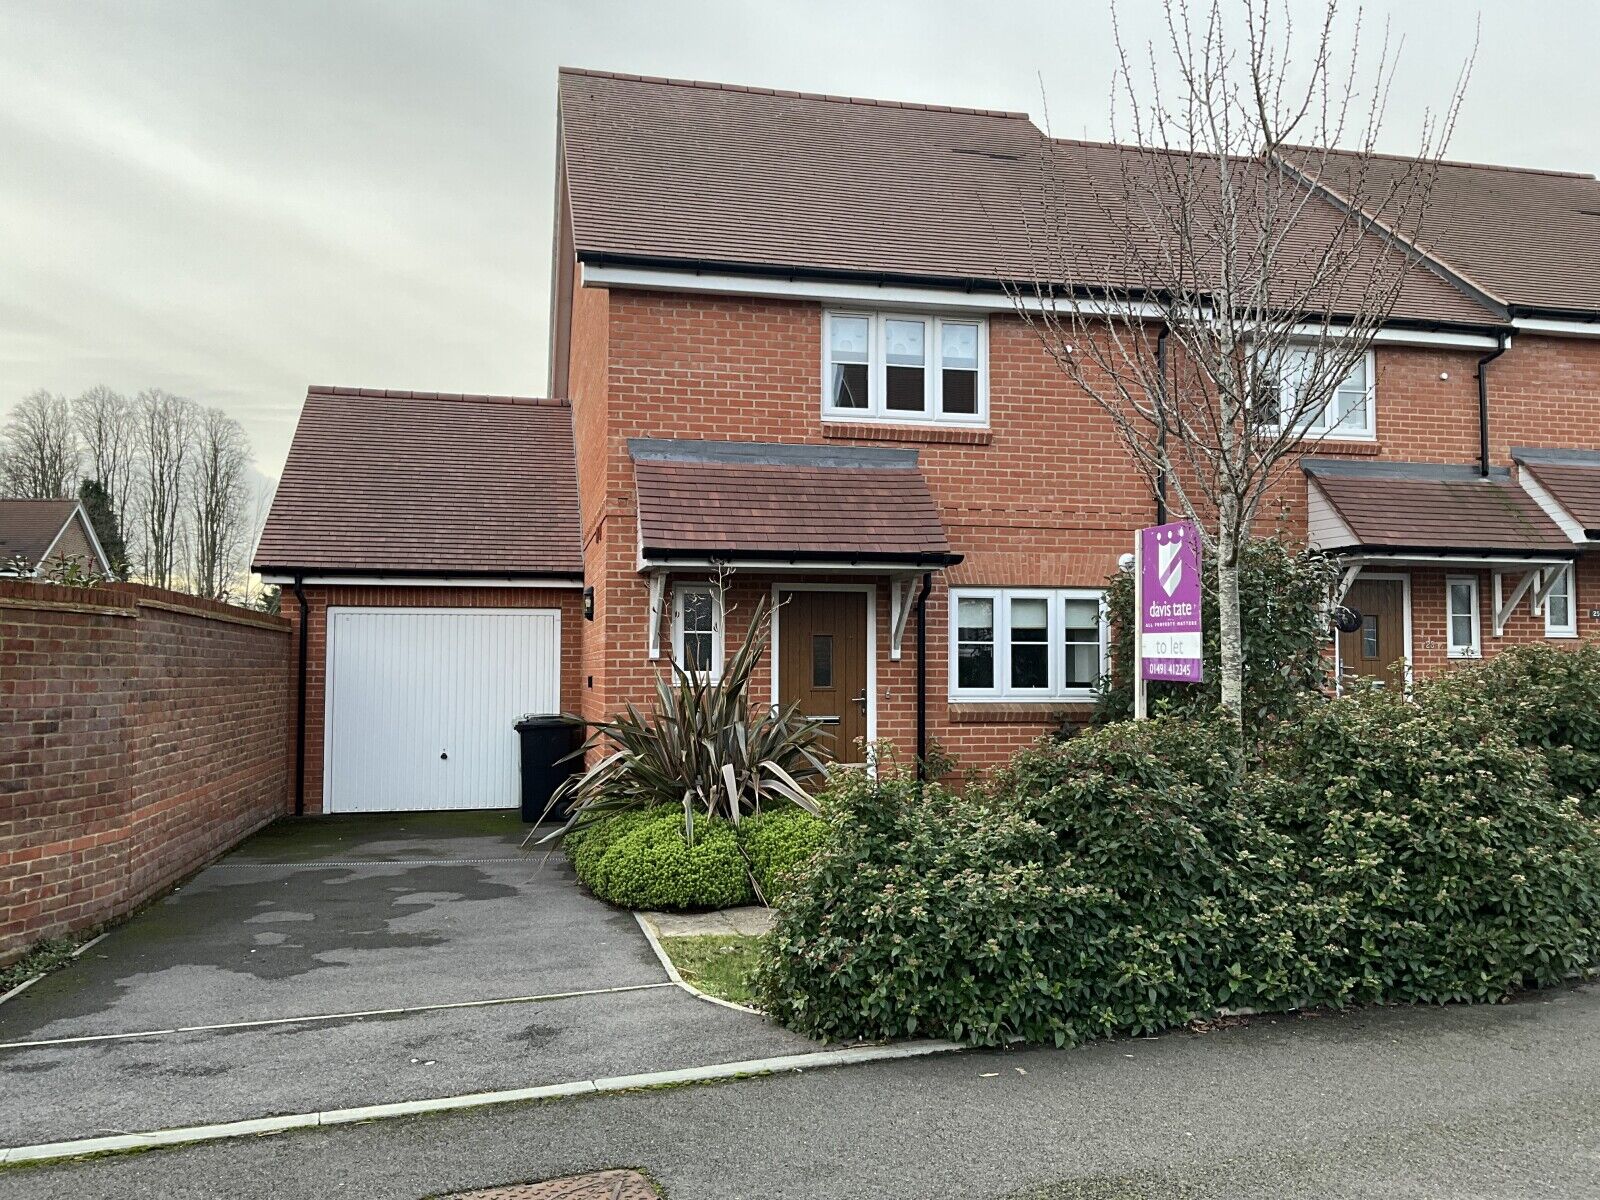 2 bedroom semi detached house to rent, Available unfurnished from 15/04/2025 Bay Tree Rise, Sonning Common, RG4, main image